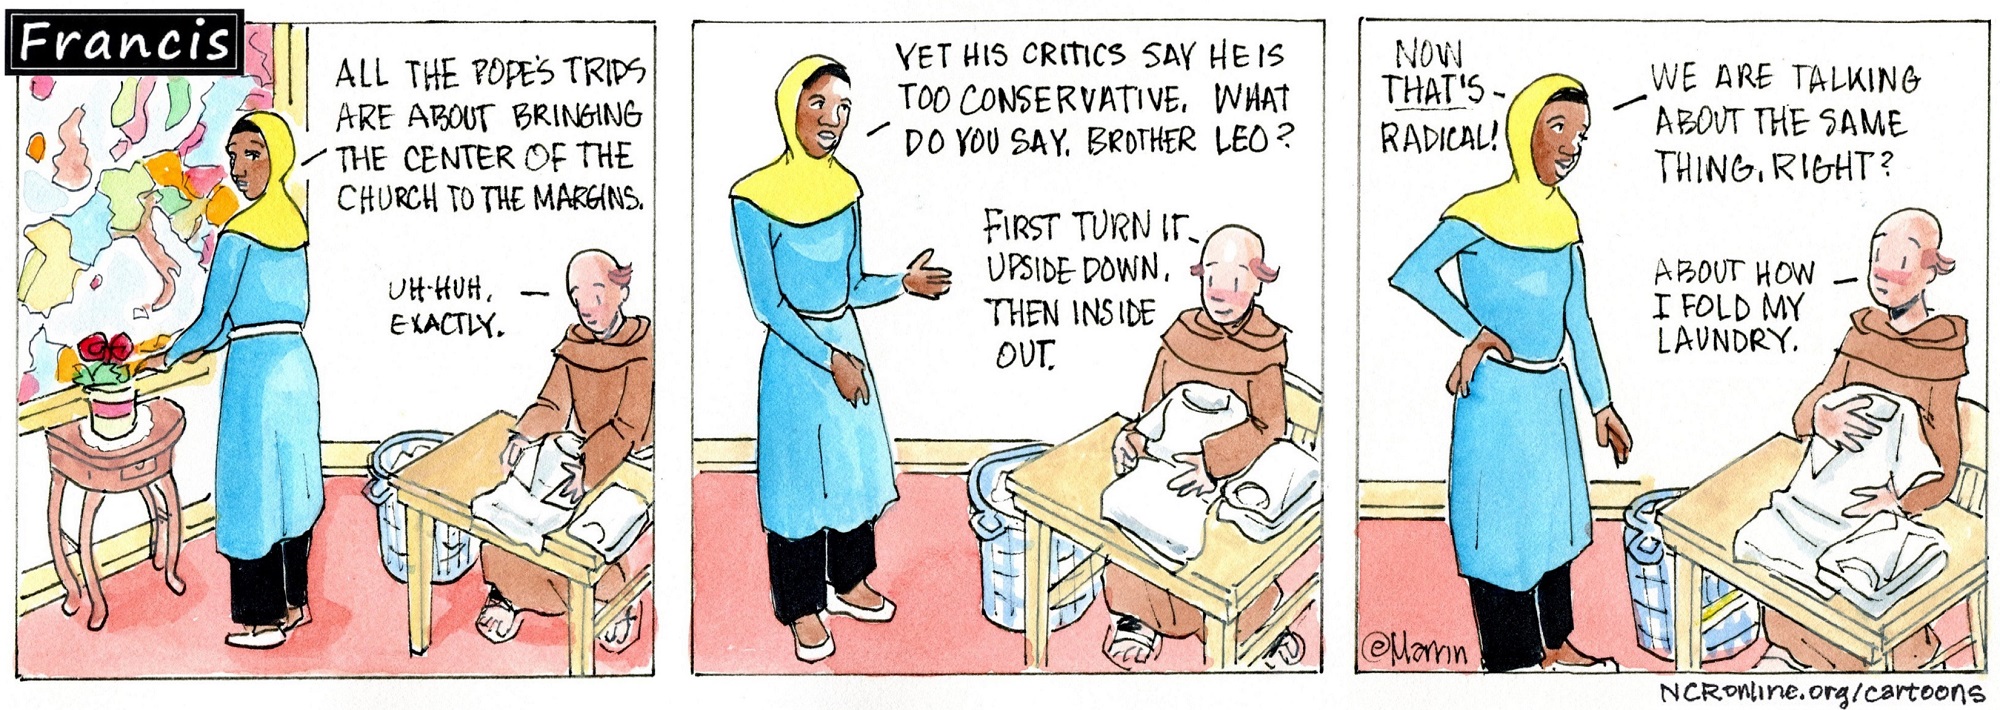 Francis, the comic strip: How do you bring the center to the margins?